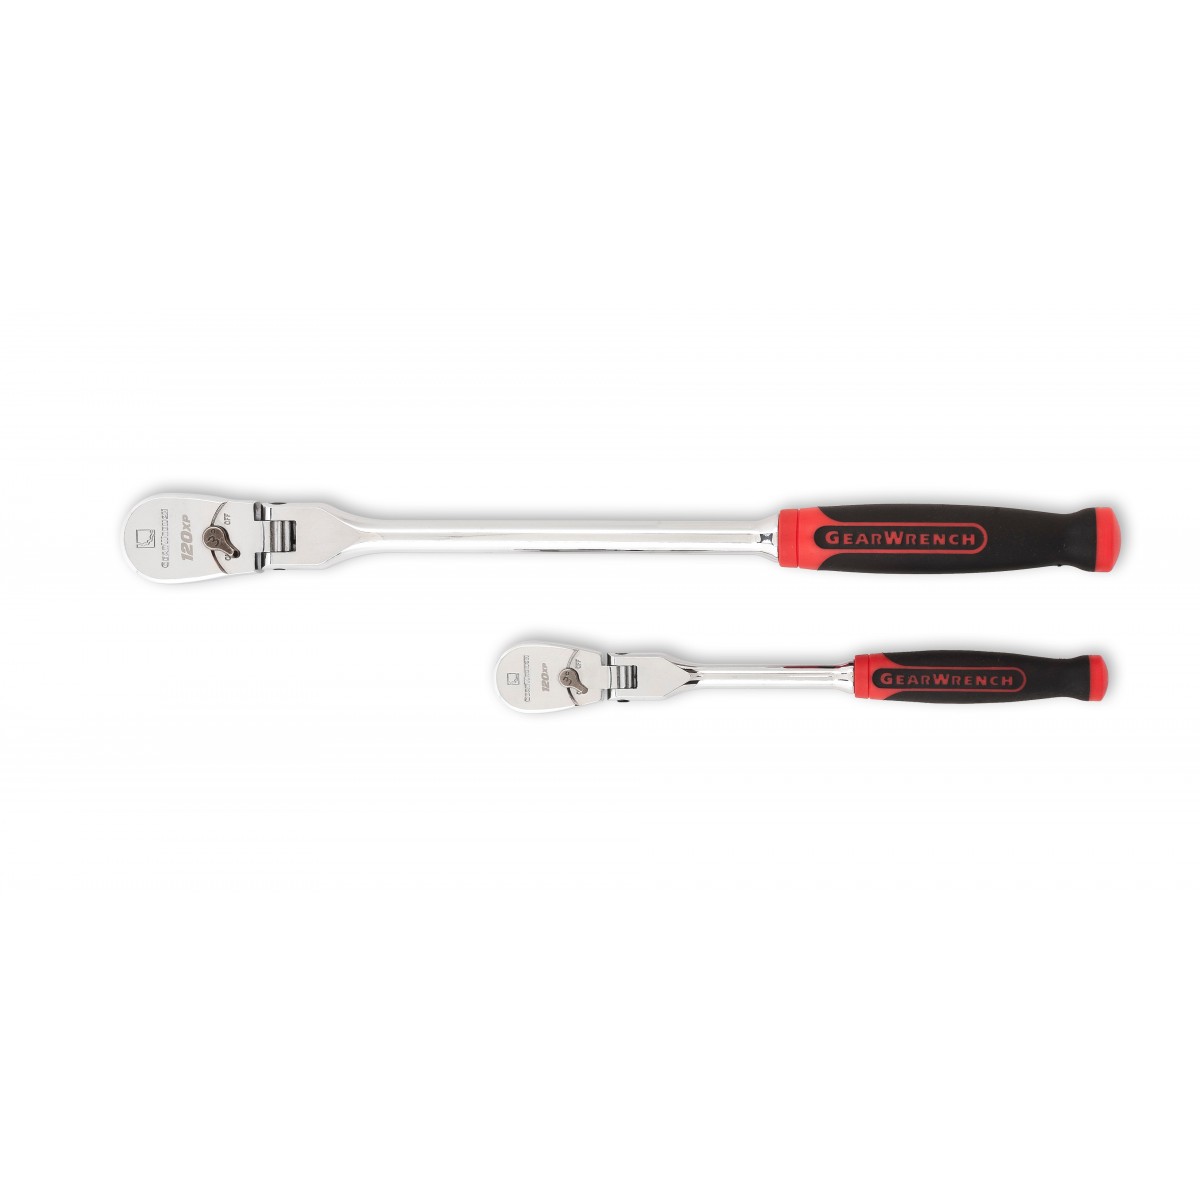 Gwr81204p 0.25 In. & 0.37 In. Drive Flex Ratchet With Cushion Grip Set, 2 Piece